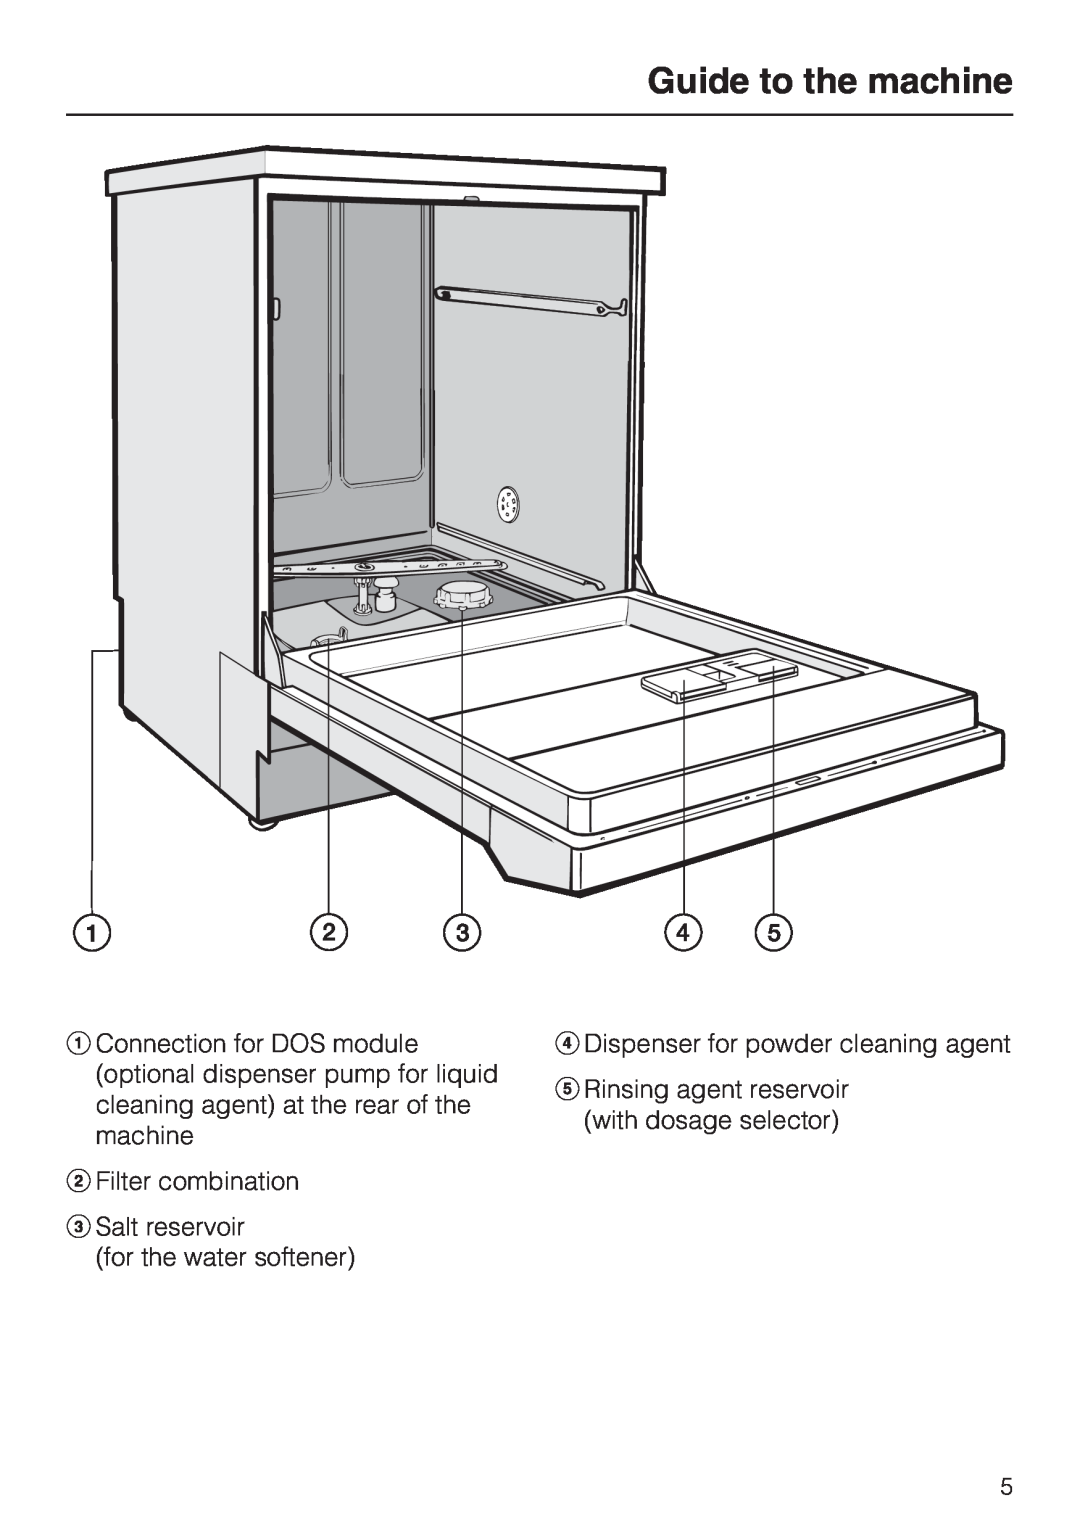 Miele G 7855 manual Guide to the machine, bFilter combination cSalt reservoir, for the water softener 